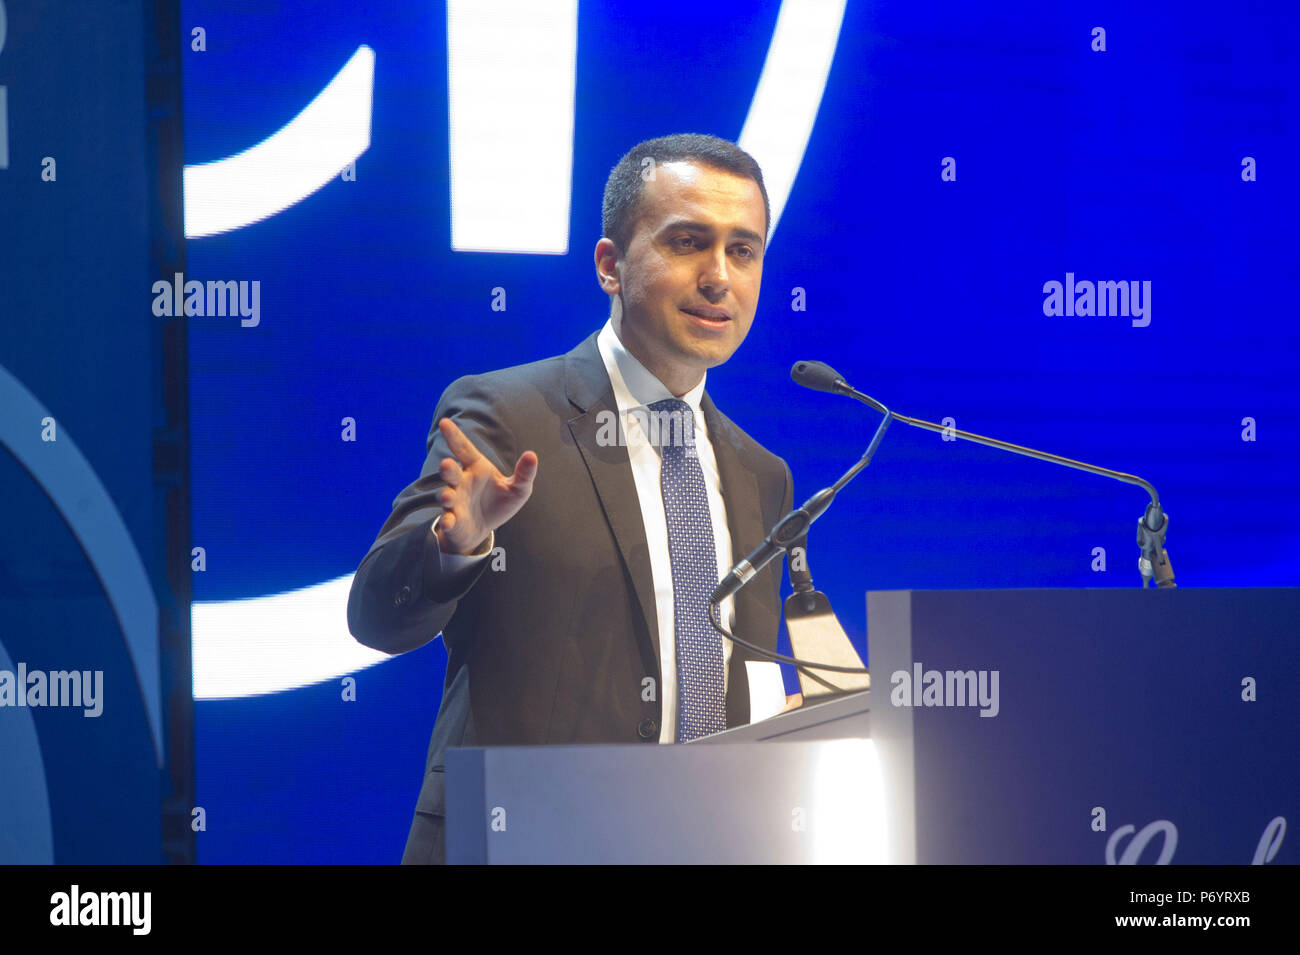 Italy, Rome, Luigi Di Maio, Leader of Five Star Movement (M5S), Vice-President of the Council of Ministers of the Italian Republic from 2018. Stock Photo